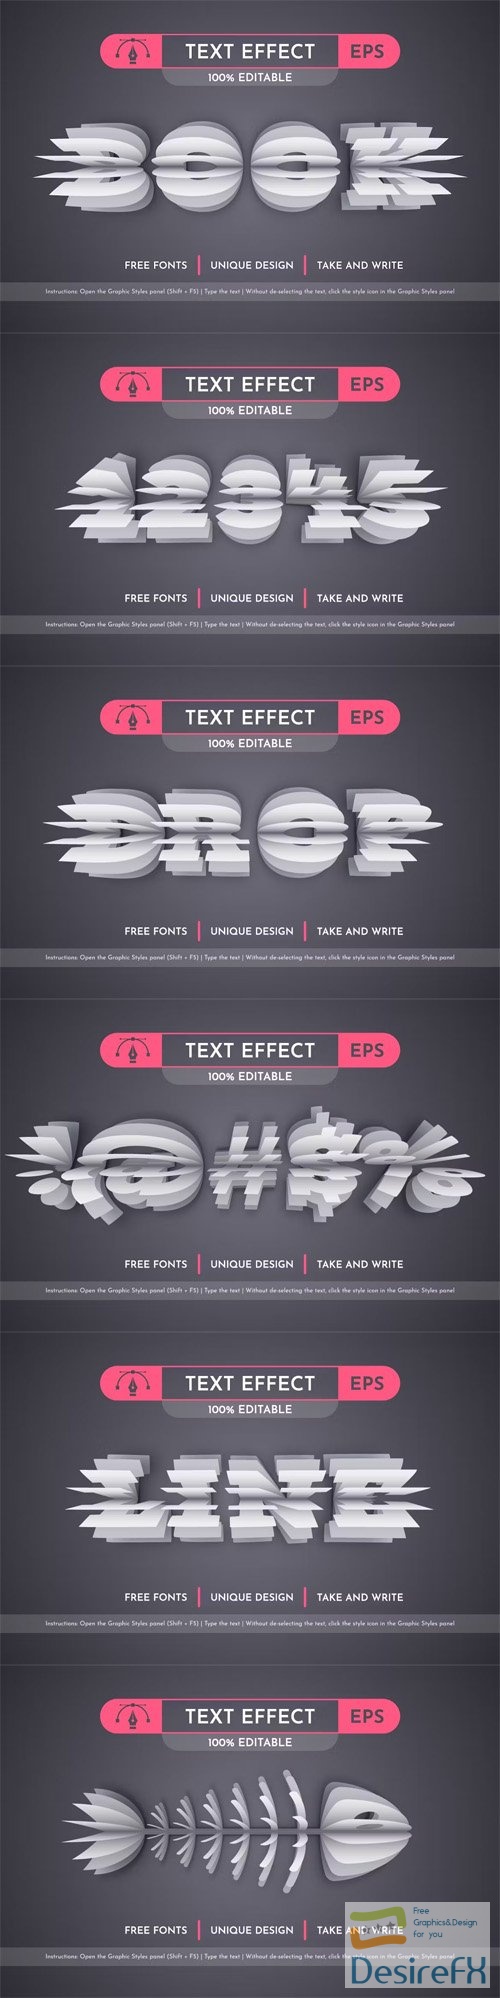 Book - Editable Text Effect, Font Style